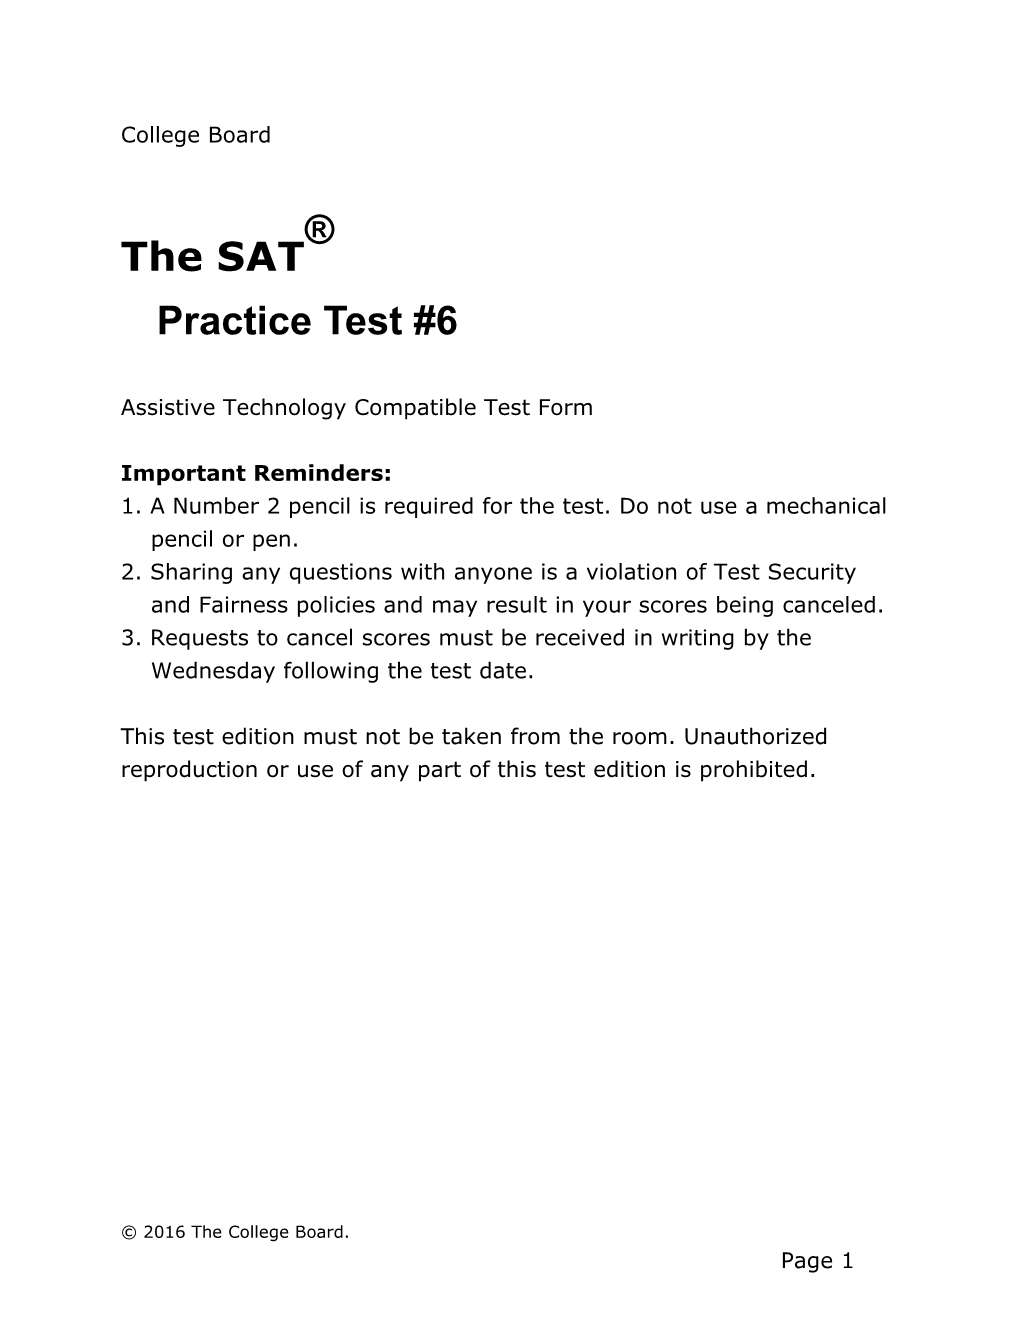 SAT Practice Test 6 Tips for Assistive Technology SAT Suite of Assessments the College Board